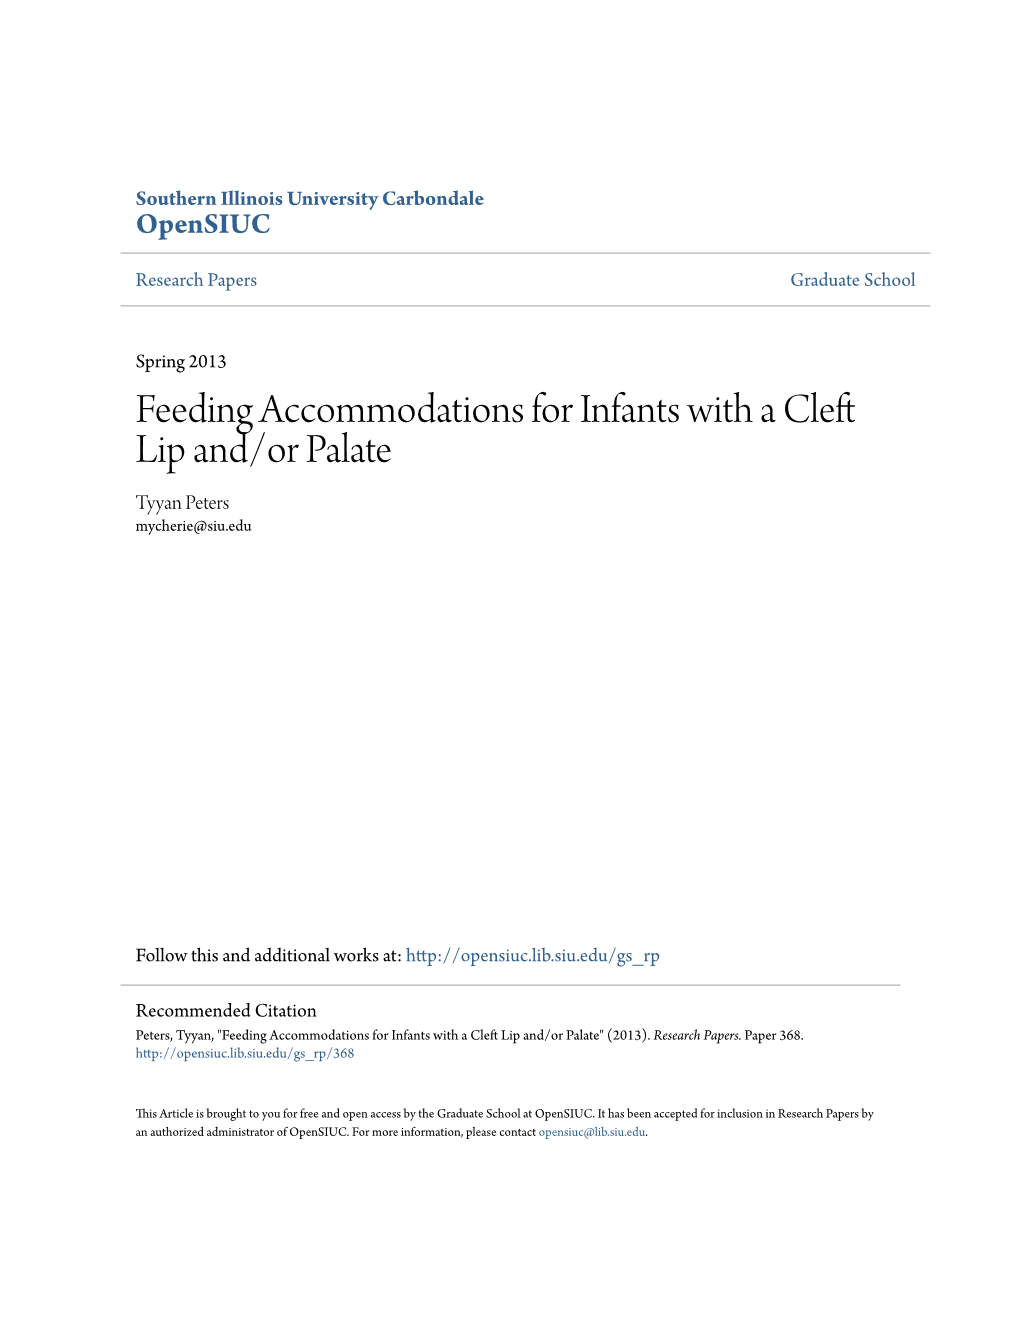 Feeding Accommodations for Infants with a Cleft Lip And/Or Palate Tyyan Peters Mycherie@Siu.Edu